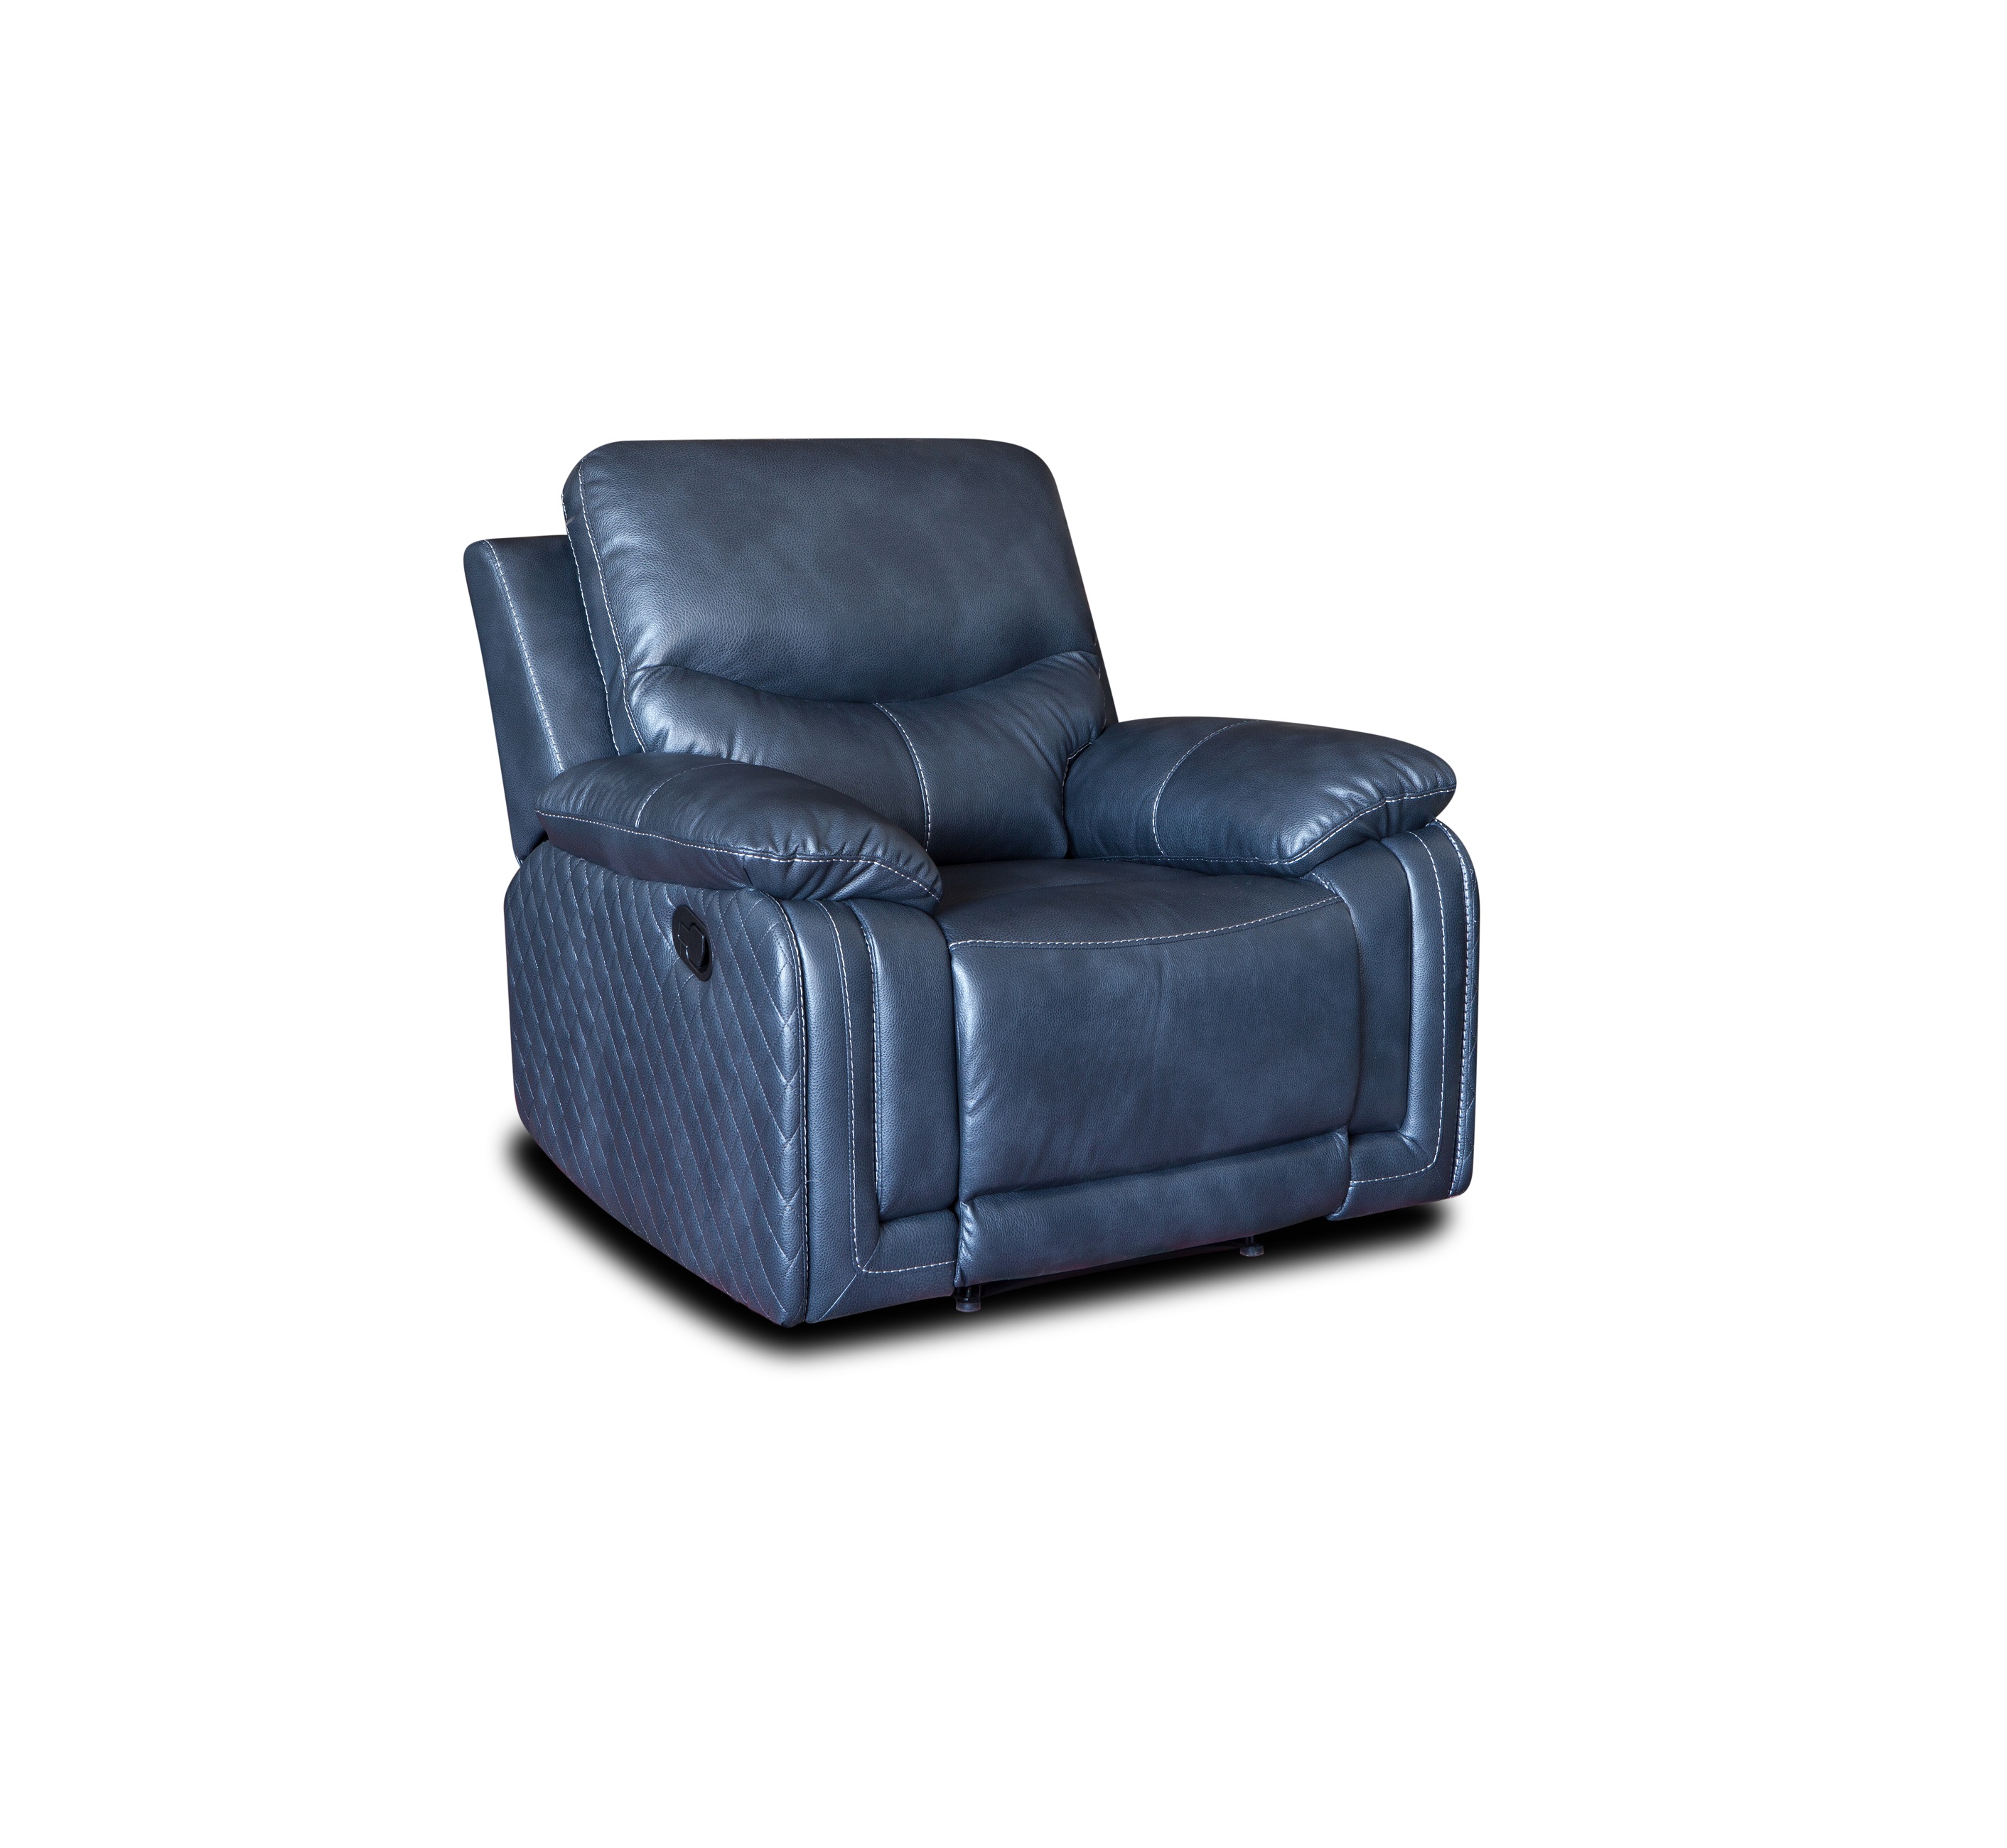 2019 modern leather one seater relax rocking chair